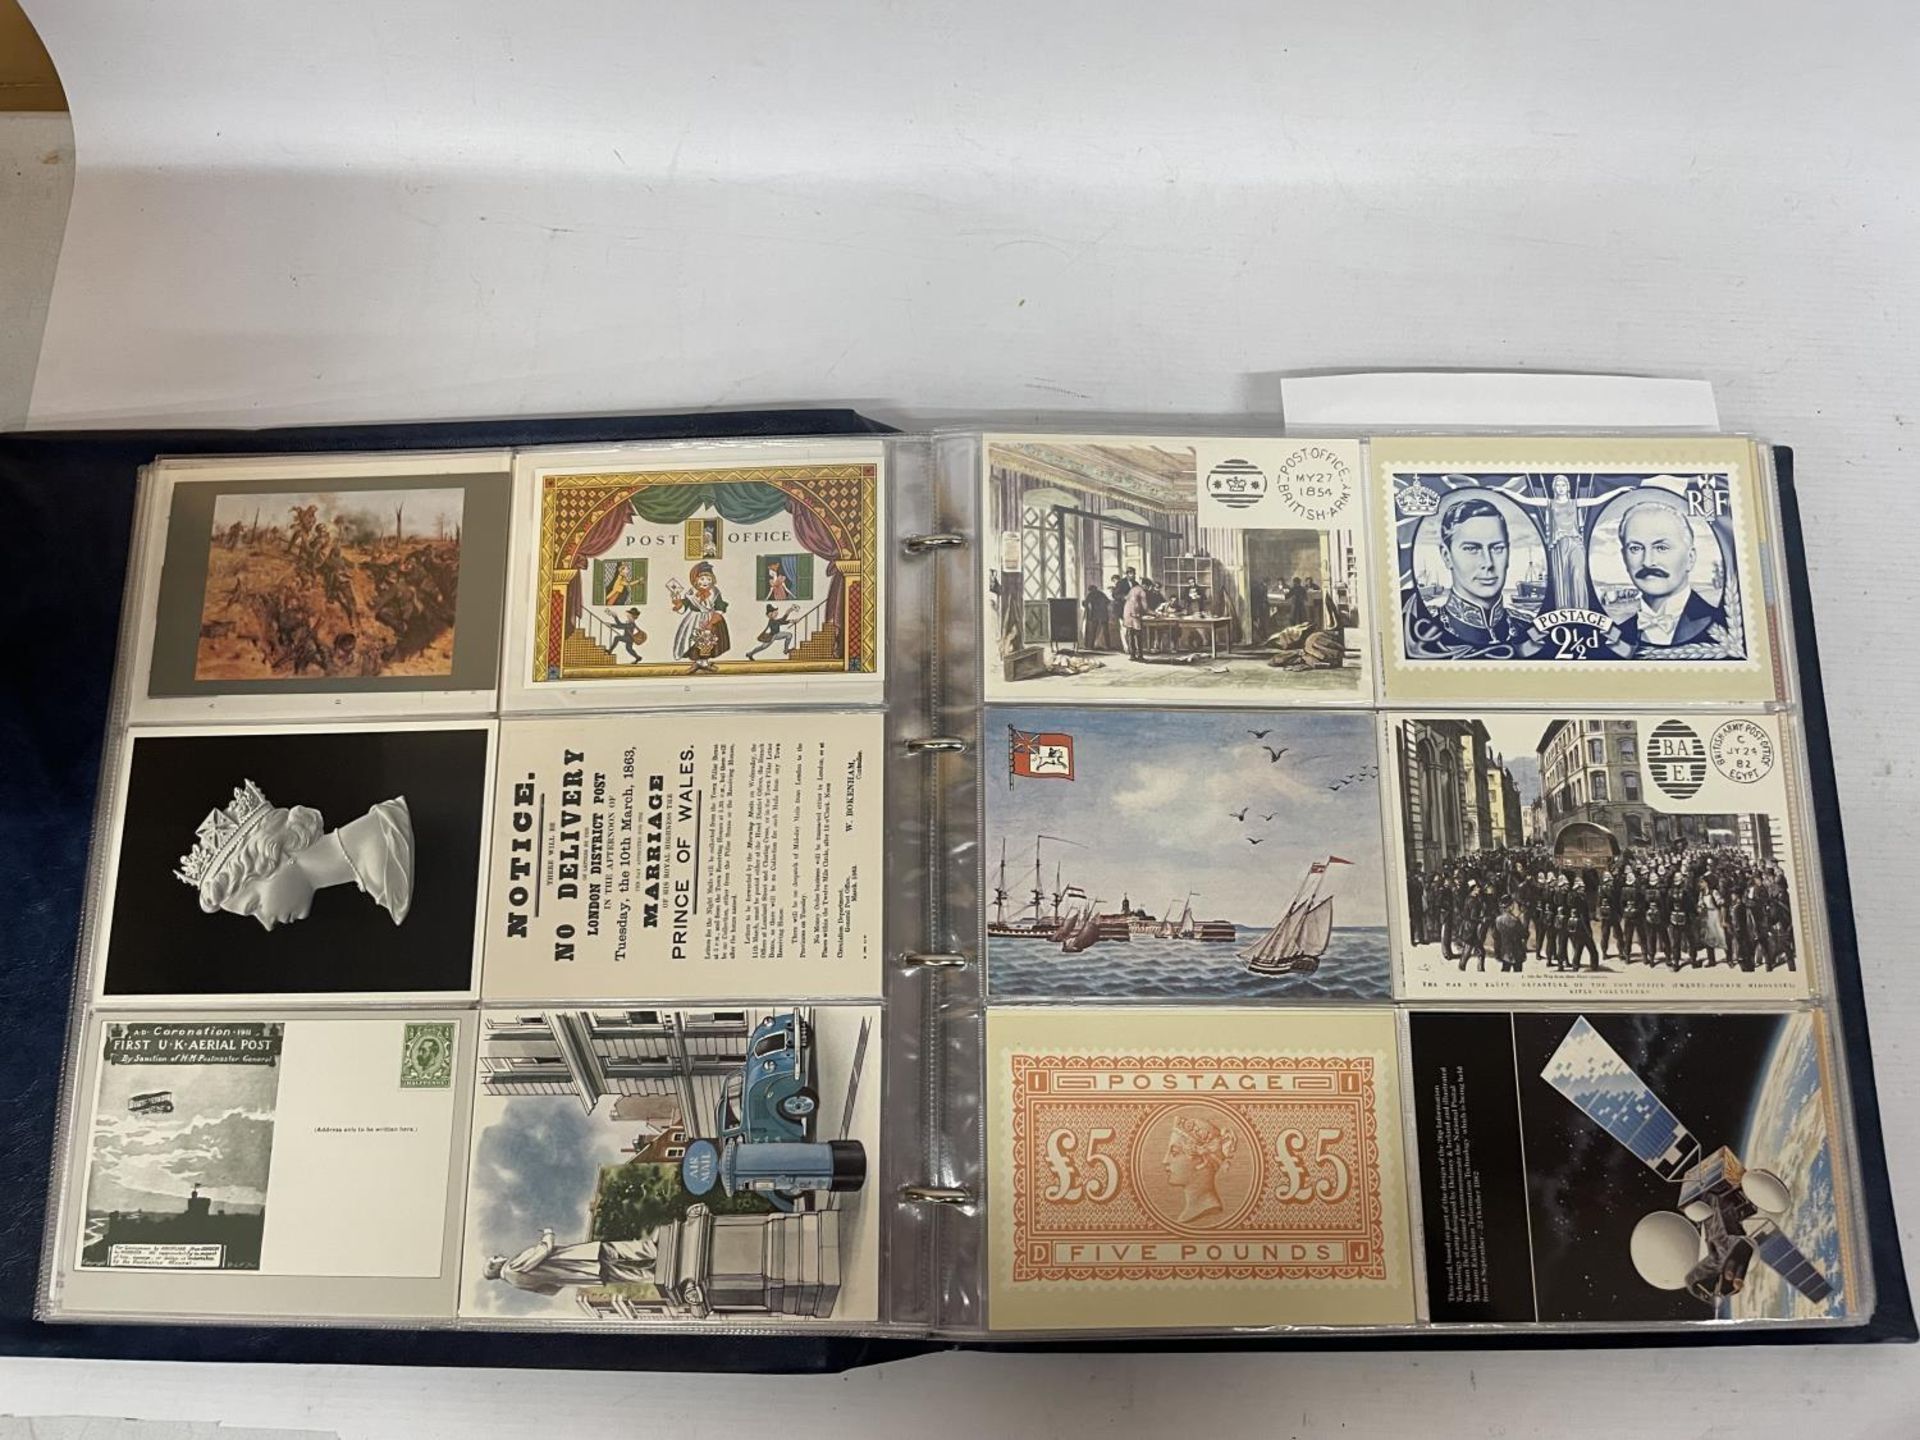 APPROXIMATELY 335 POSTCARDS RELATING TO THE NATIONAL POSTAGE MUSEUM, BATH POSTAL MUSEUM, TELECOM, - Image 3 of 11